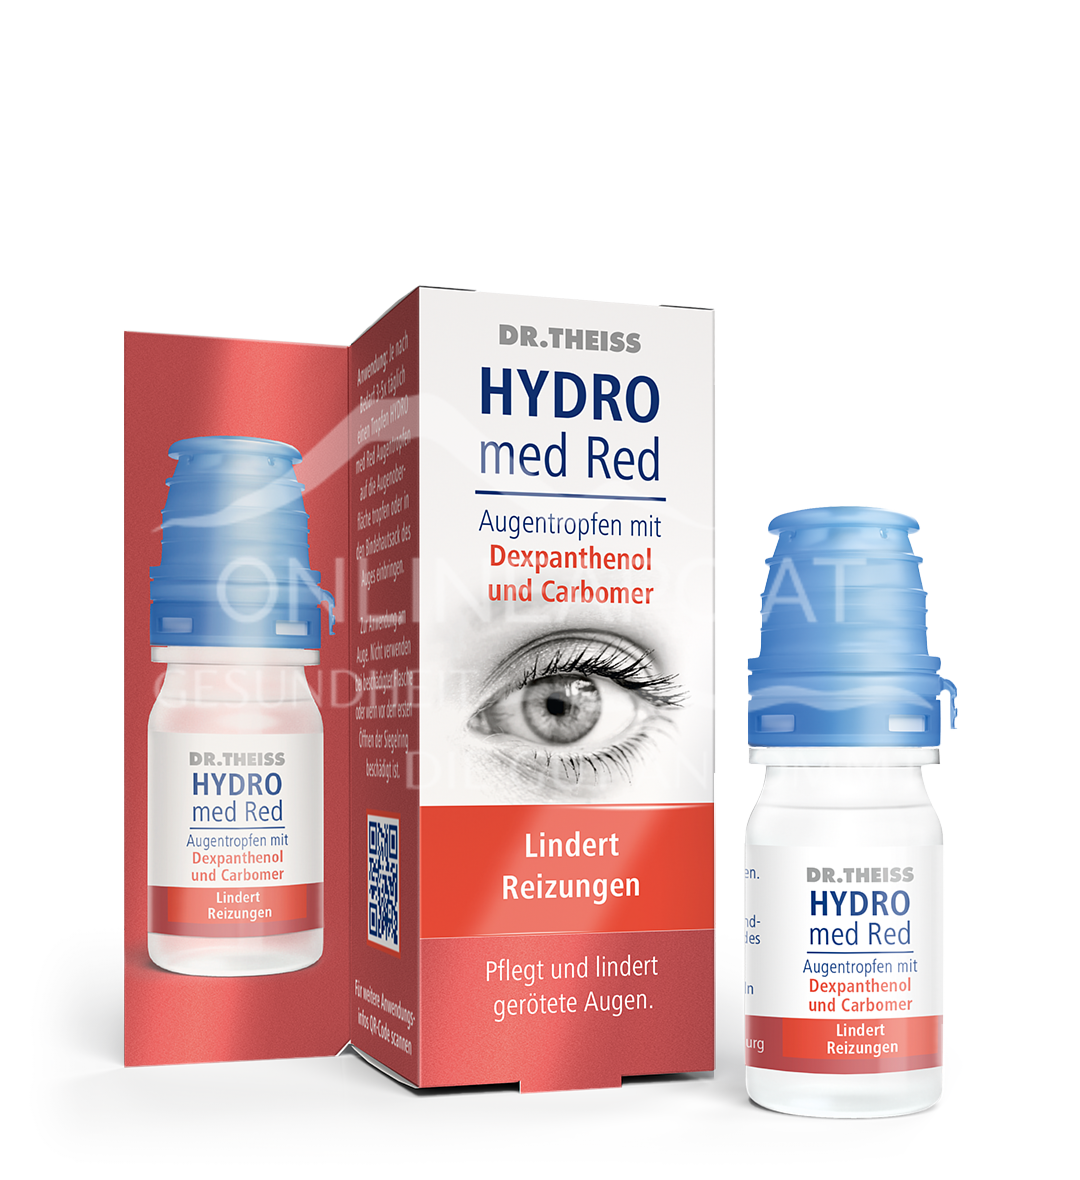 Dr. Theiss HYDRO med Red Augentropfen